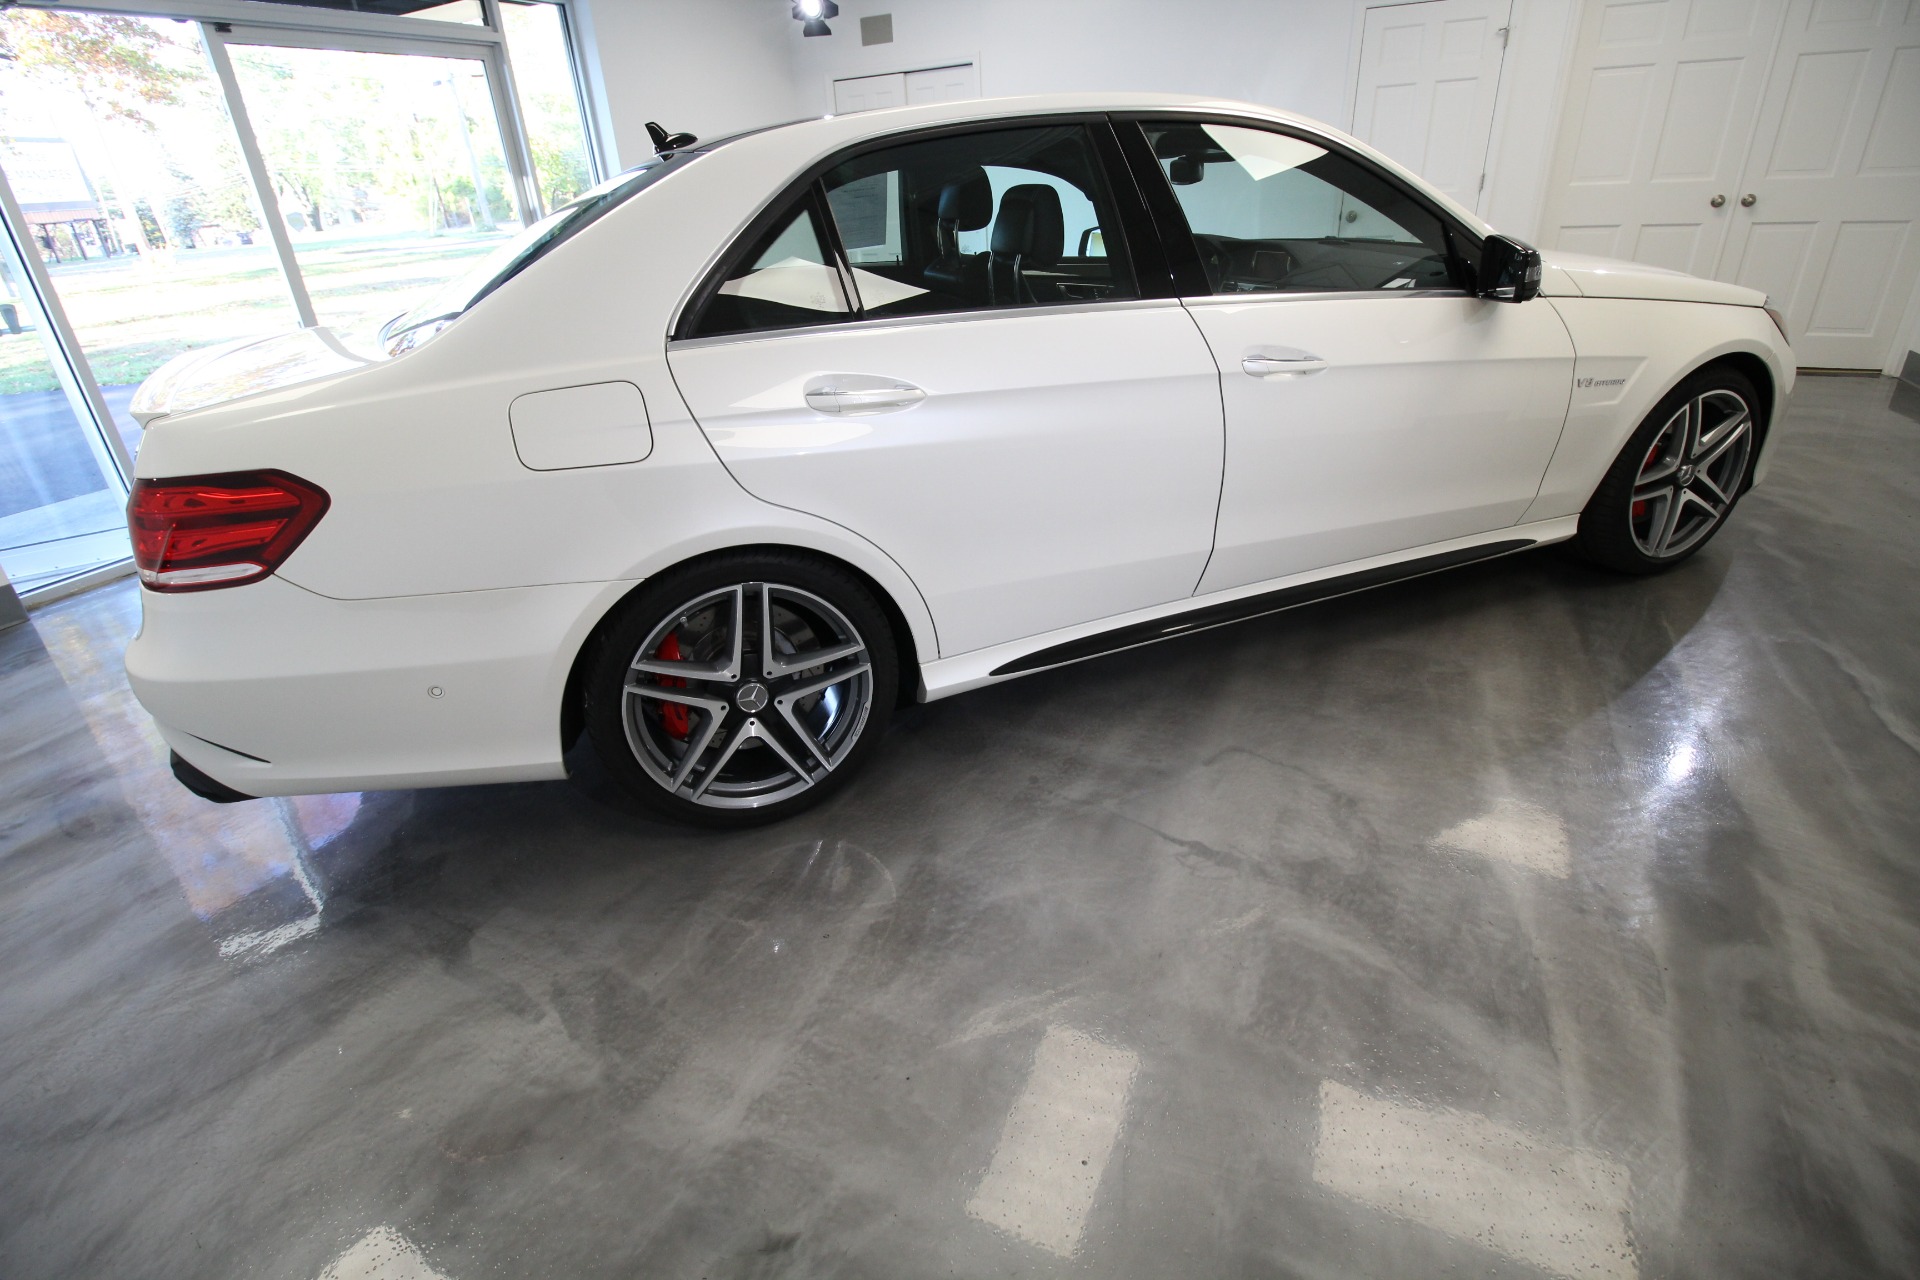 Used 2014 WHITE Mercedes-Benz E-Class E63 S E63S LOADED WITH OPTIONS SUPERB CONDITION RARE FIND | Albany, NY